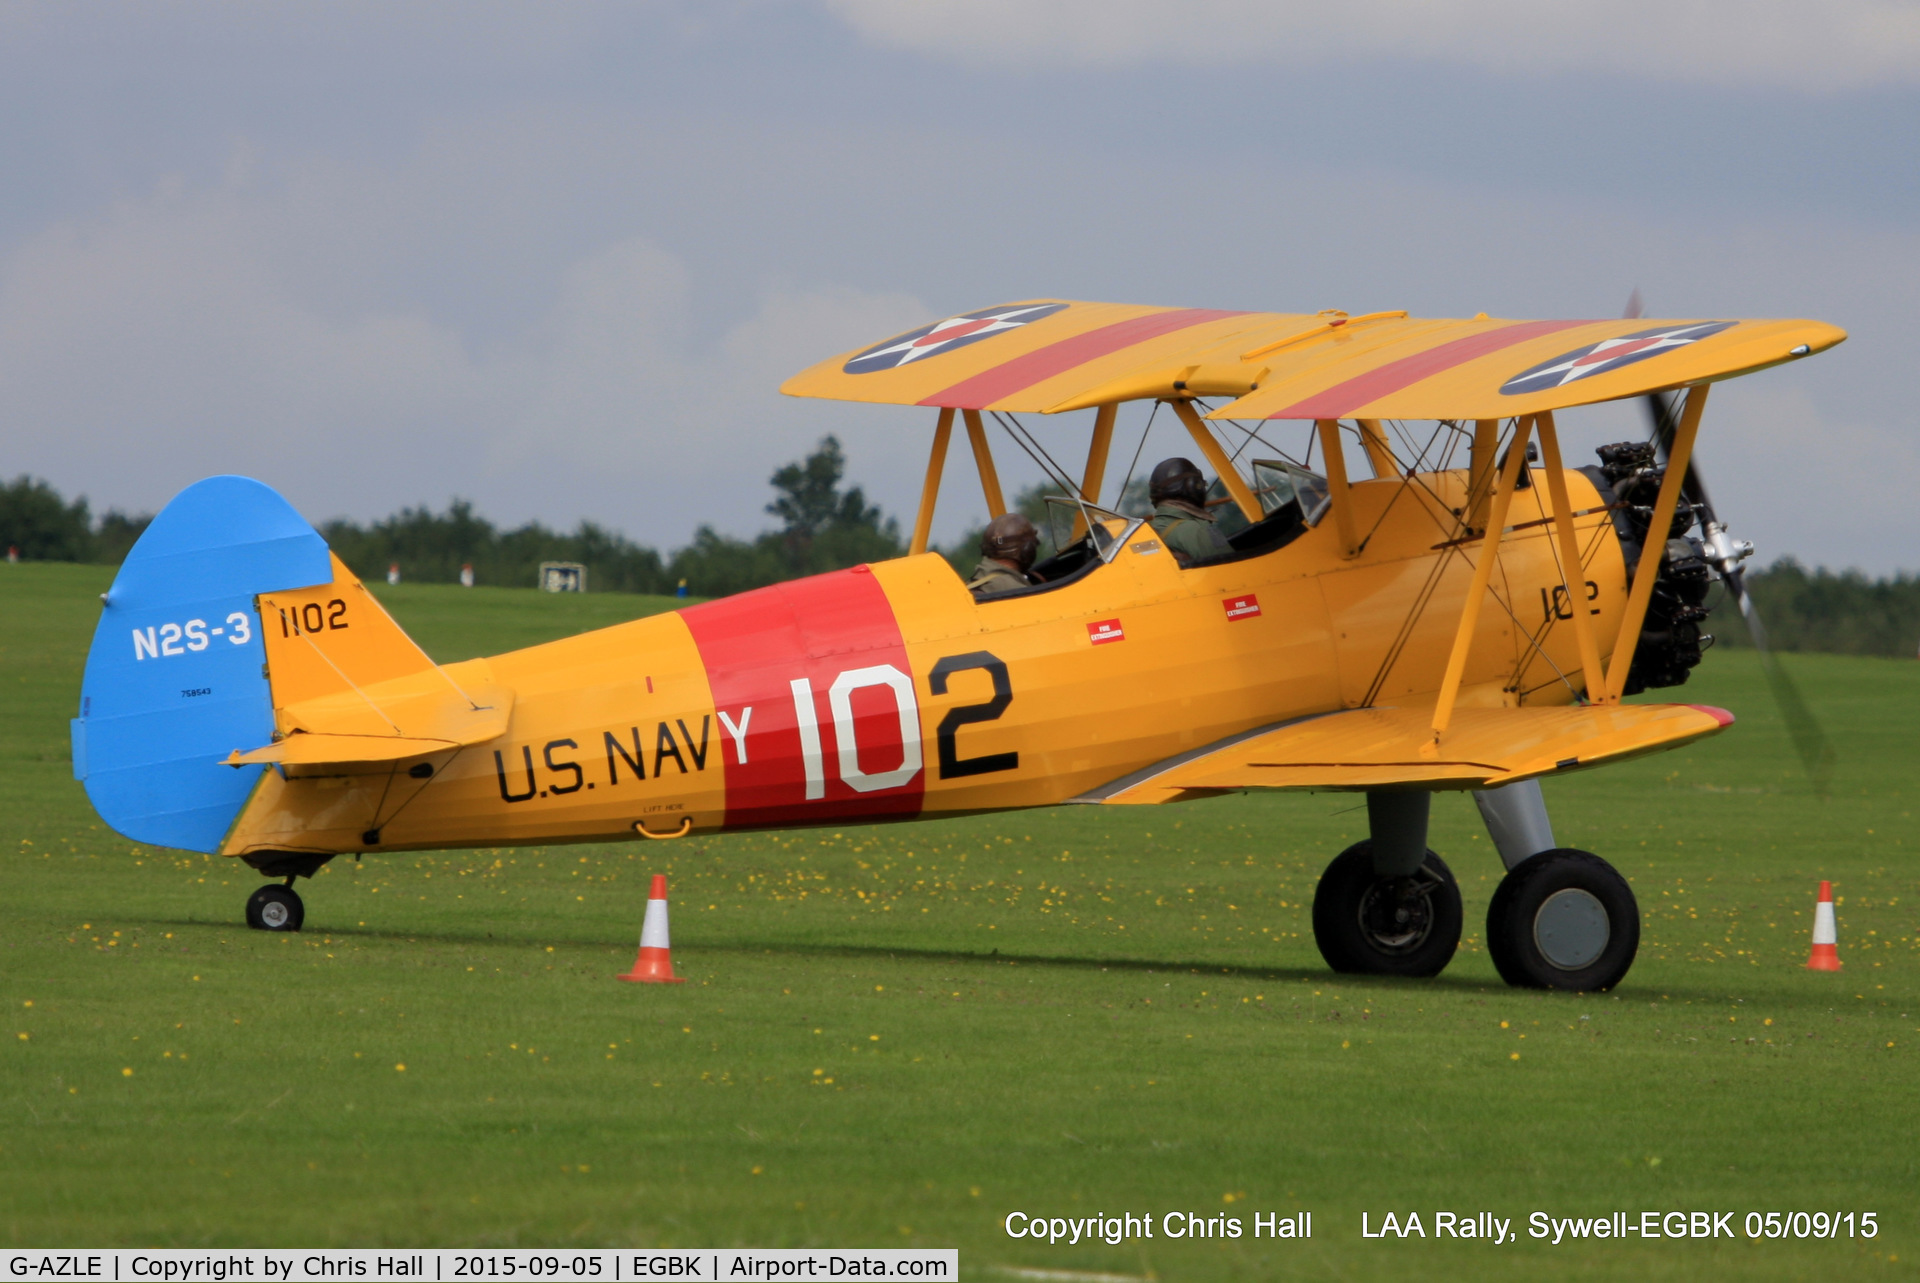 G-AZLE, 1940 Boeing E-75 C/N 75-8543, at the LAA Rally 2015, Sywell